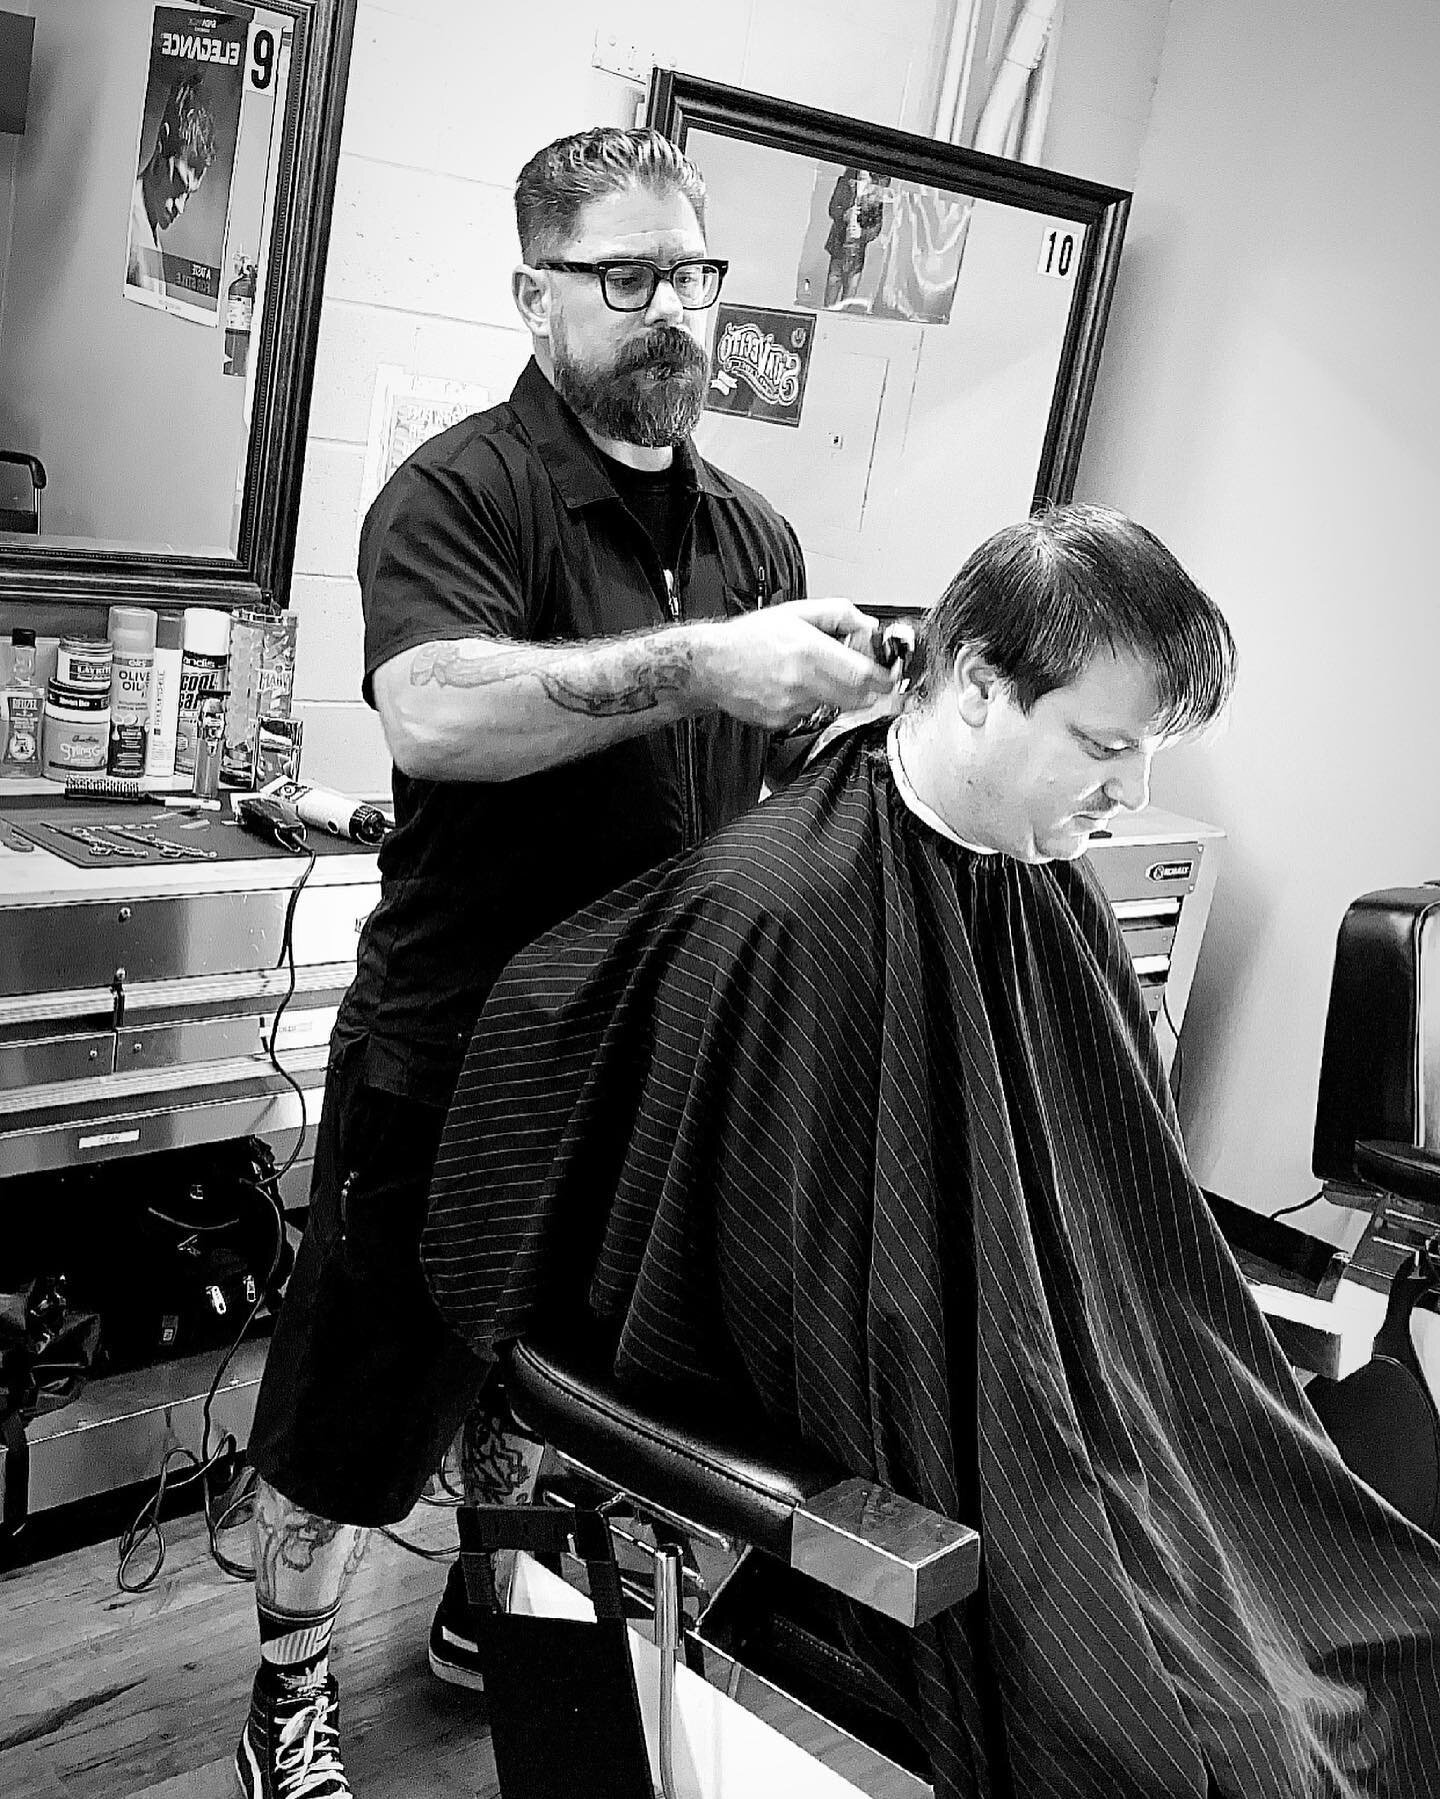 &quot;Without continual growth and progress, such words as improvement, achievement, and success have no meaning&quot;

Here is a student barber Nate who just finished up with the client consultation and ready to start the cut. We open tomorrow morni